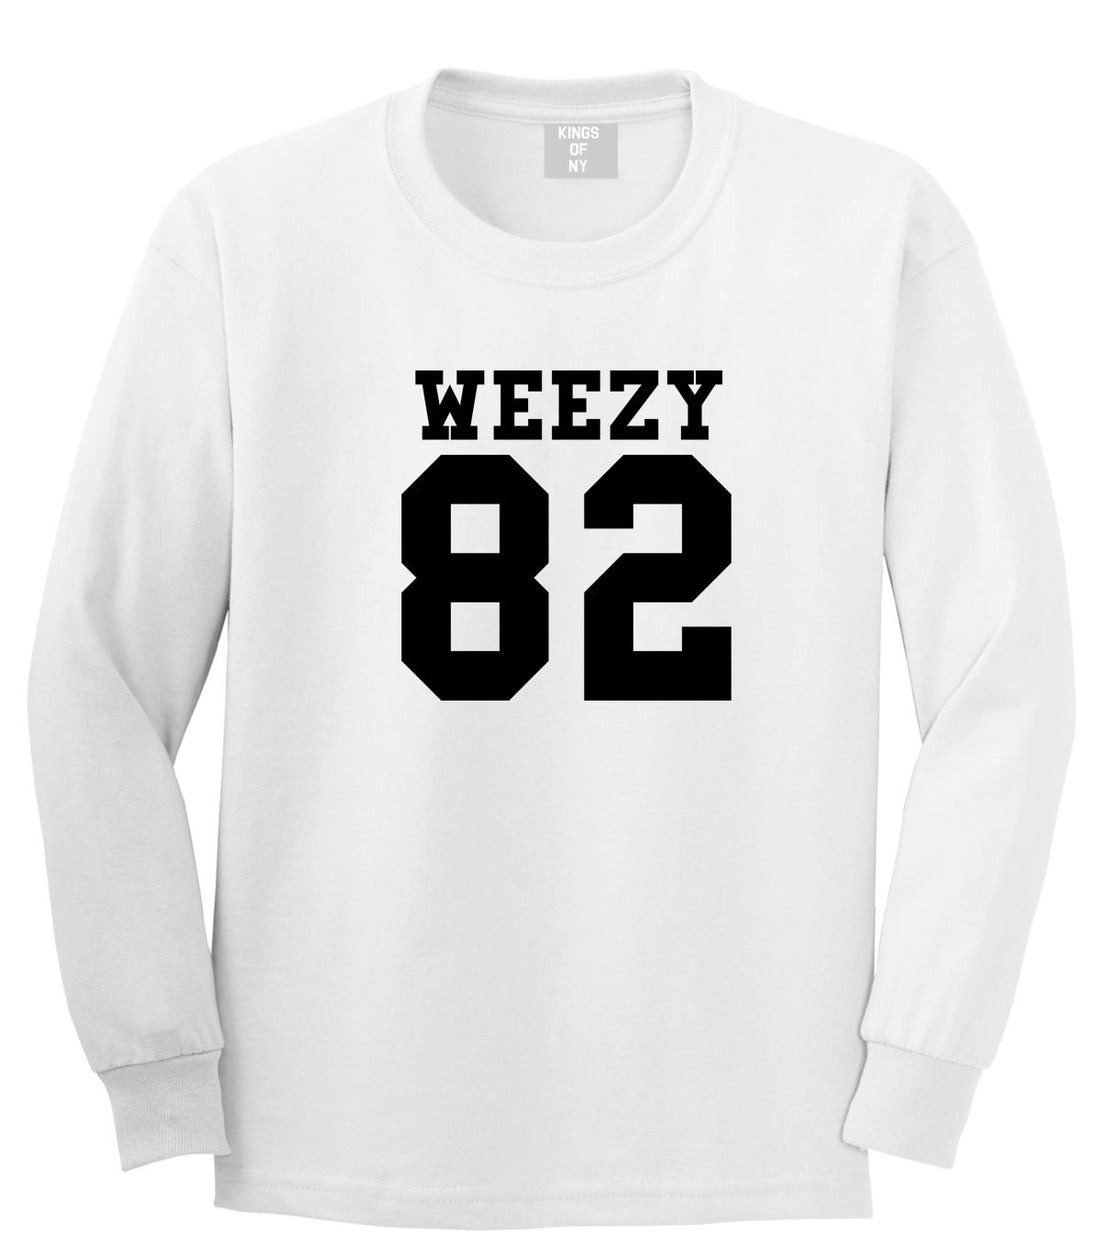 Weezy 82 Team Long Sleeve T-Shirt in White by Kings Of NY